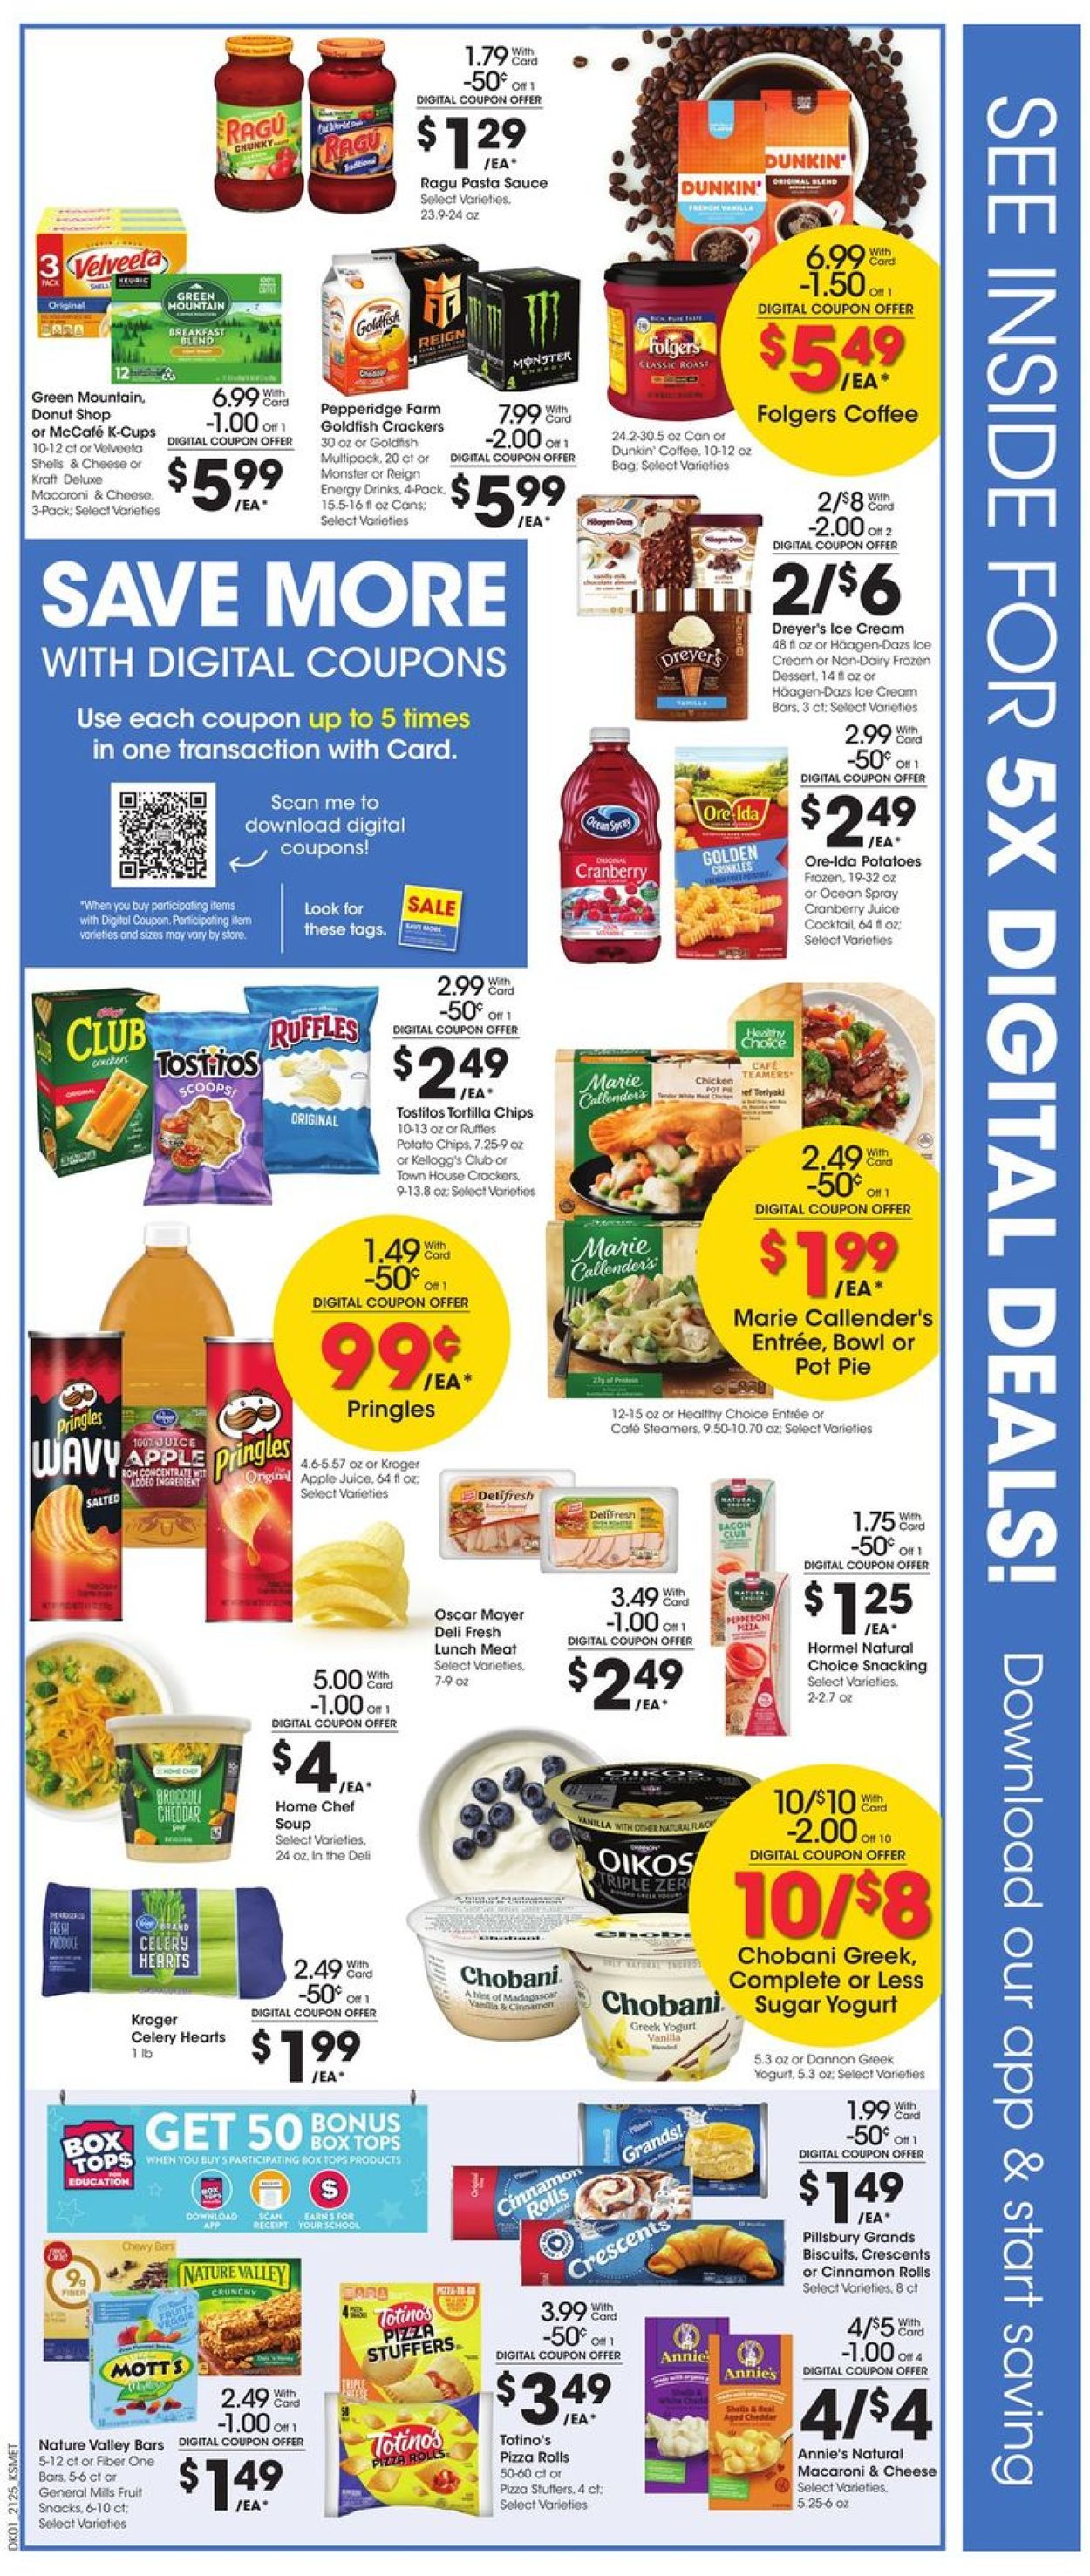 King Soopers Ad from 07/21/2021